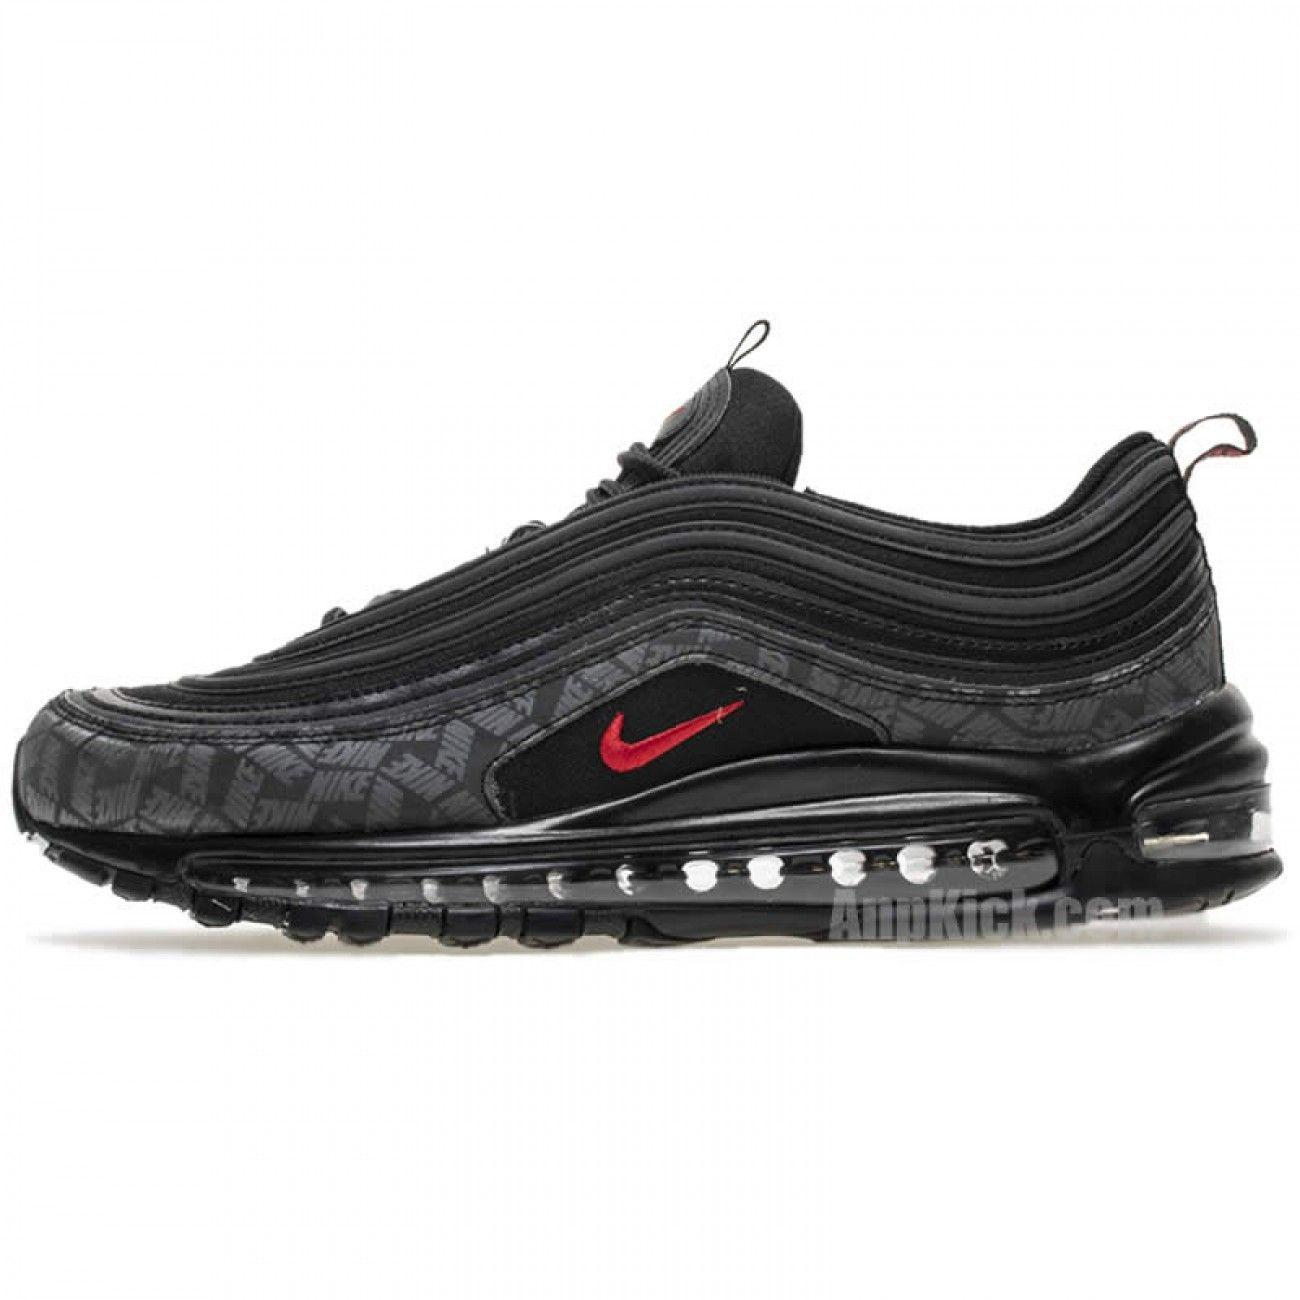 Black and Red Nike Logo - Nike Air Max 97 Reflective Logo All Black And Red 97s Sale AR4259-001